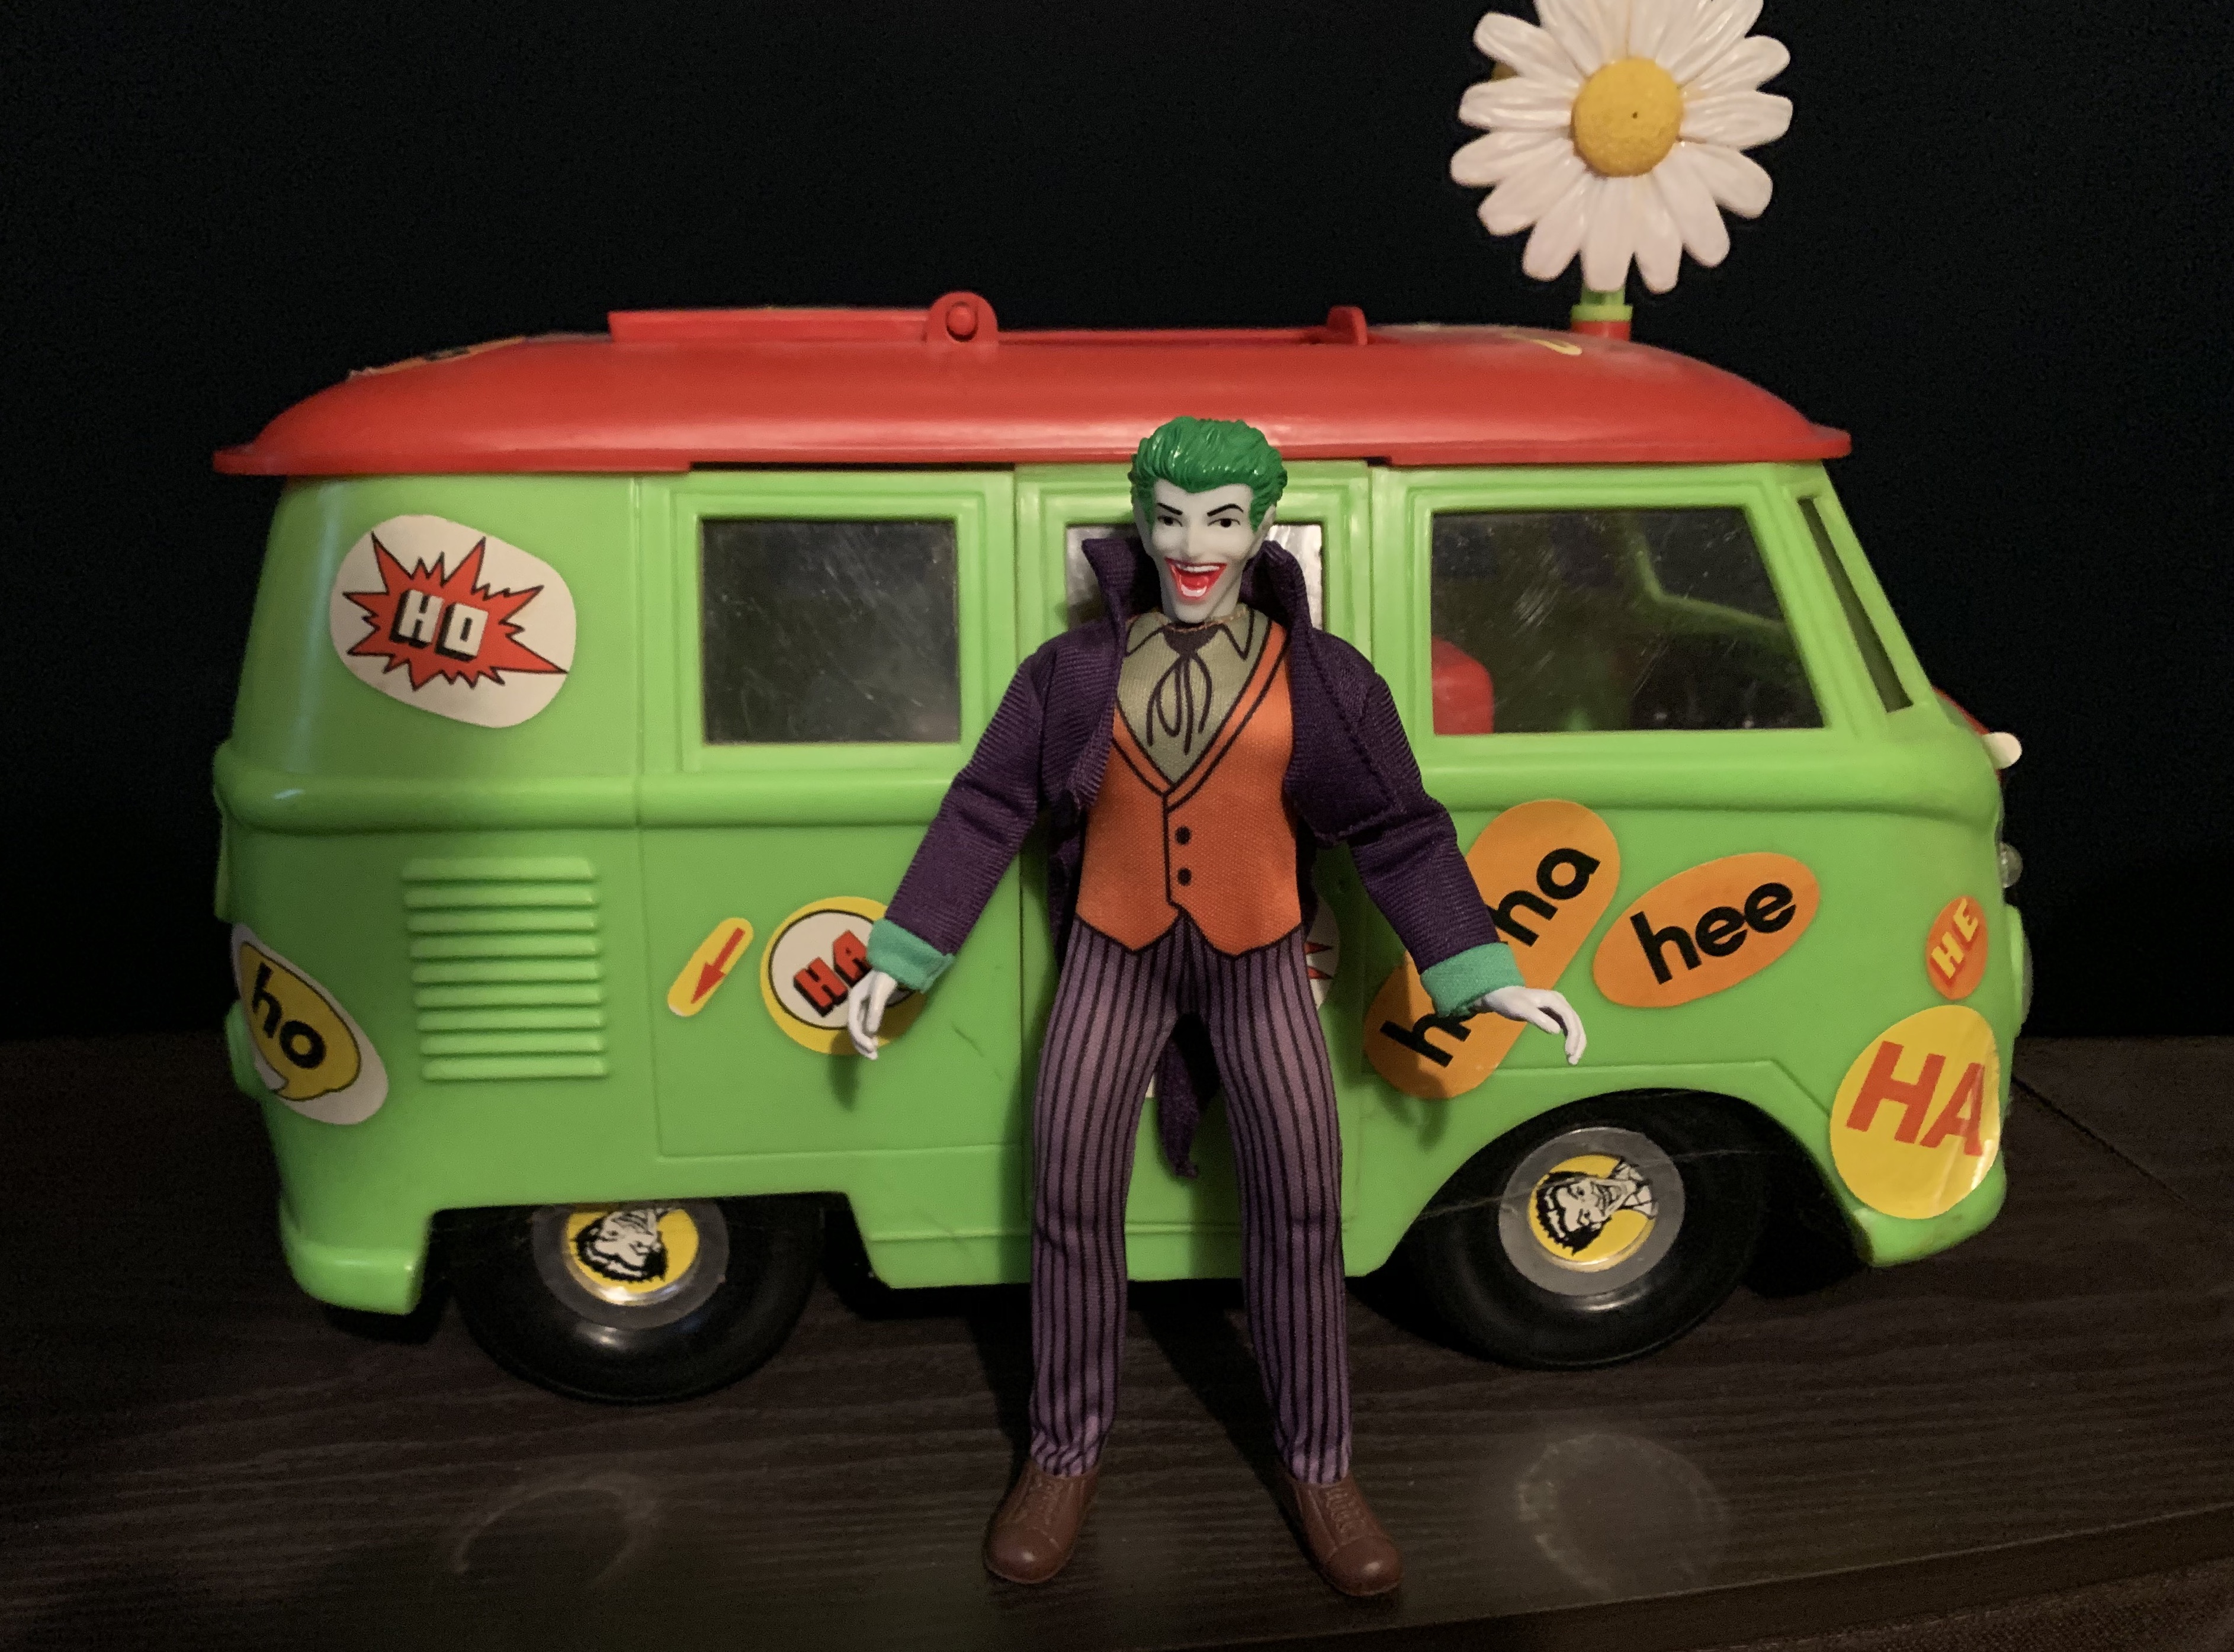 listing Is For Decal Set Only Mego Joker Mobile Replacement Decals 